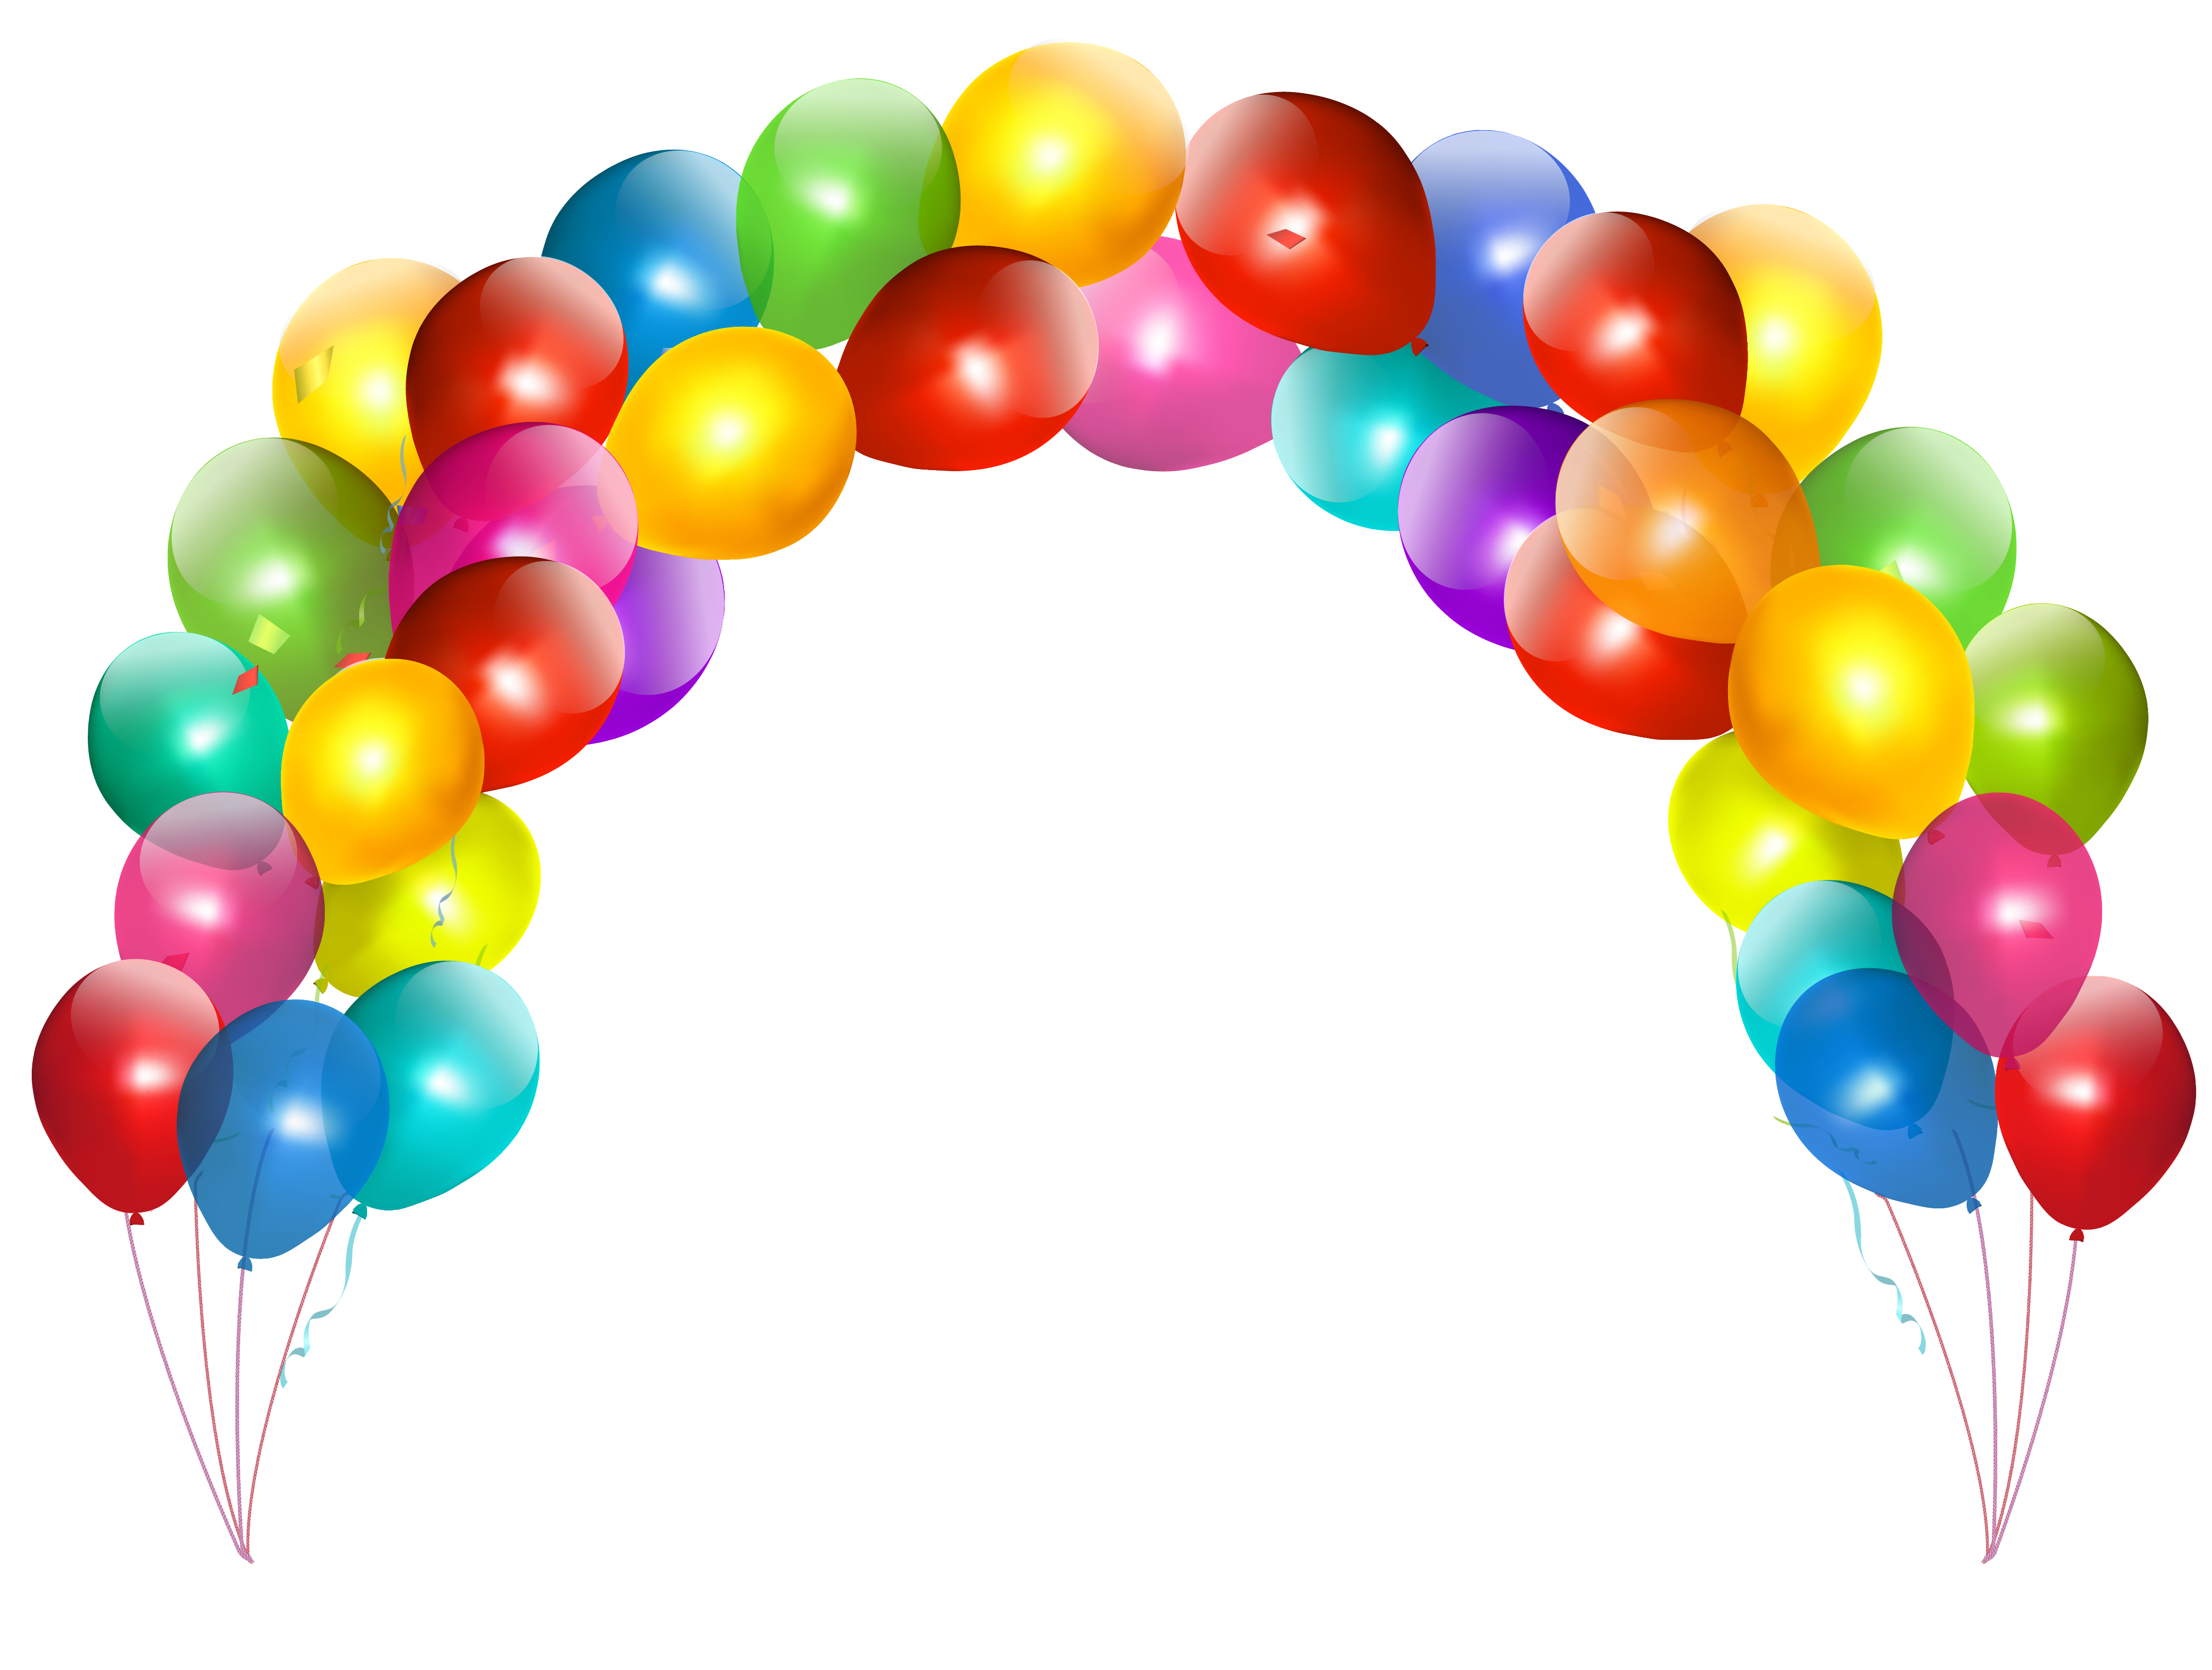 Balloon Arch PNG Picture | Gallery Yopriceville - High-Quality ...